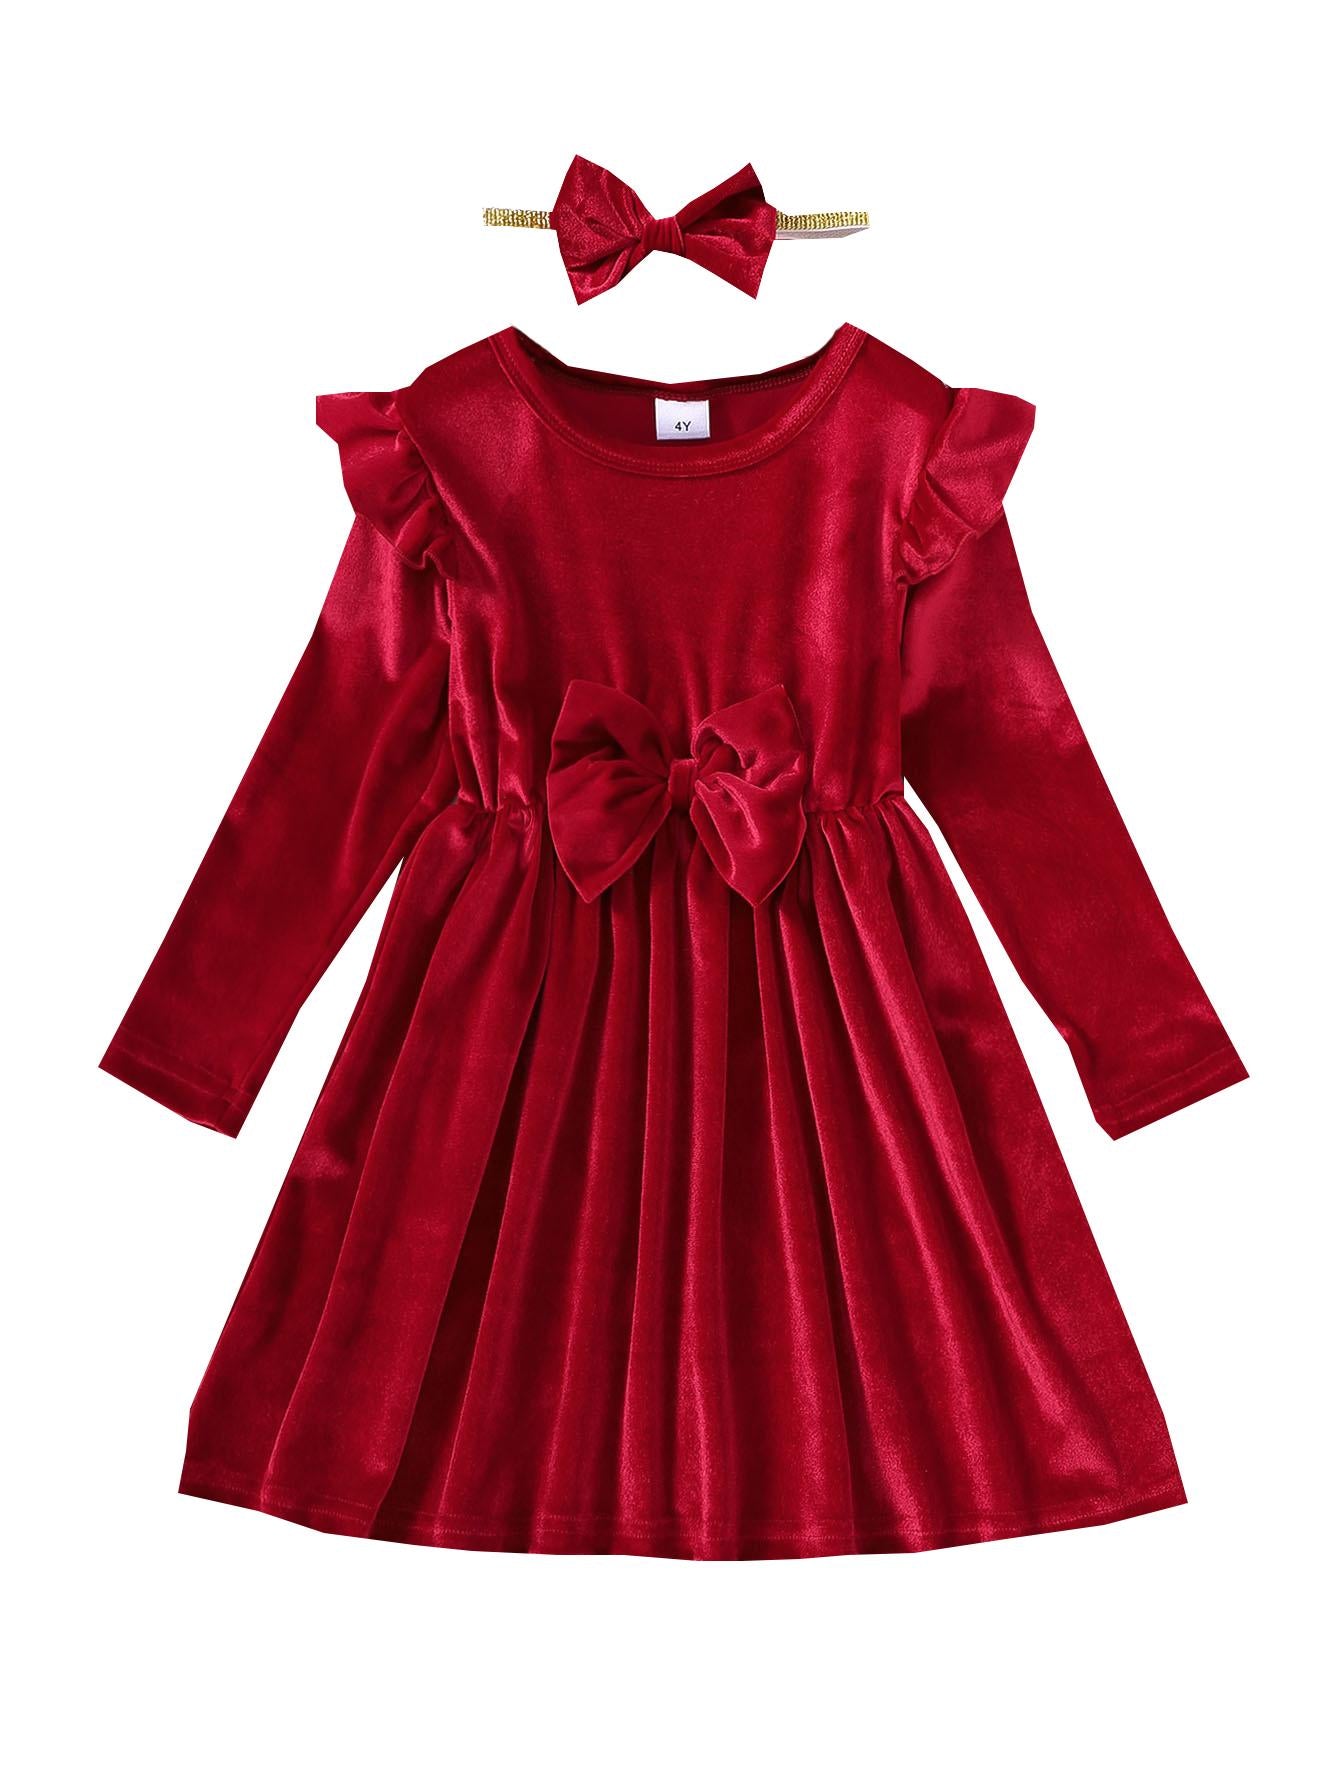 4-6Y Ready Stock 4-6y Toddler Girl's 2pcs Plain Bow Decor Ruffle Trim Long Sleeve Dress & Hair Band Set,Cute Romantic Kids Fall Winter Outfits Red Catpapa 462311005